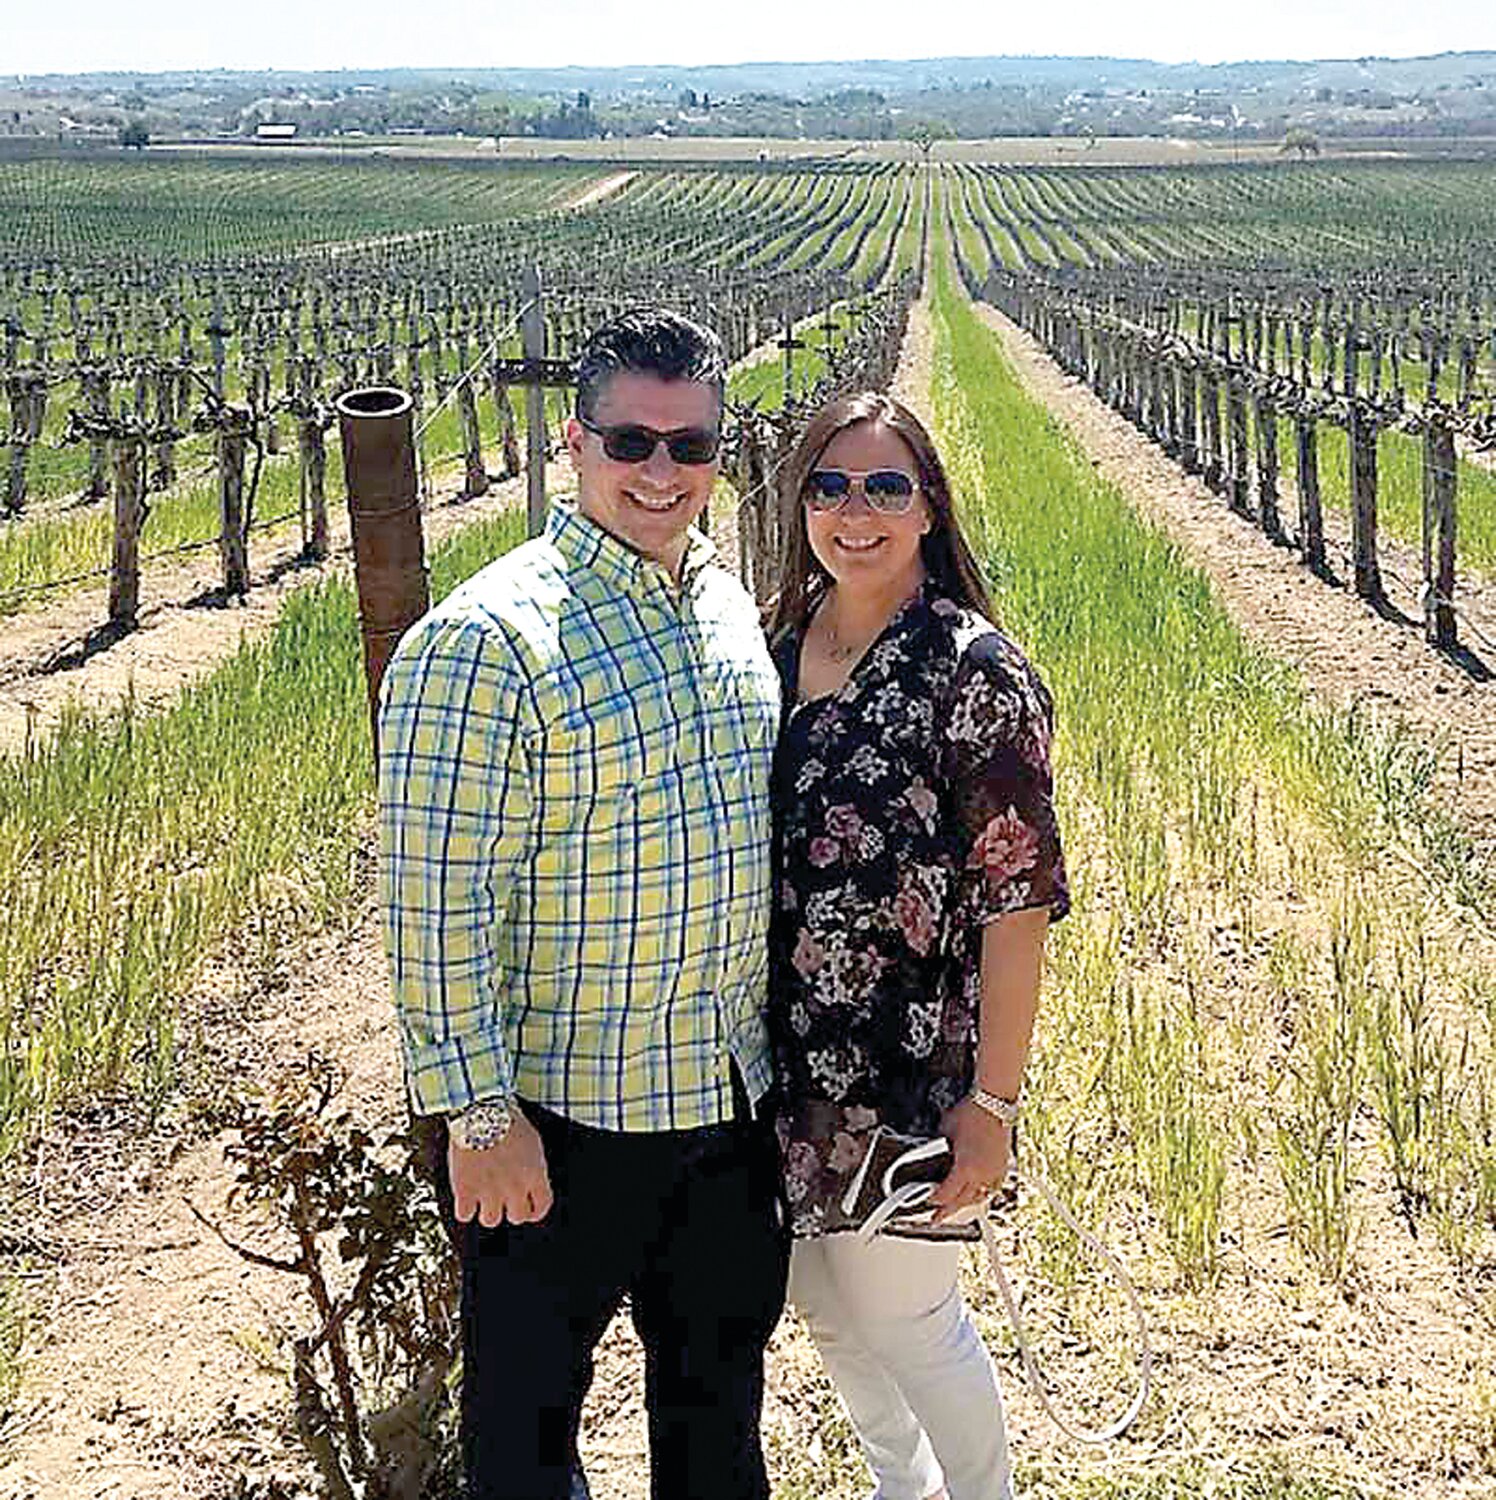 Eric and Nicole Landolfi plan to open Waters Edge Winery & Bistro of Doylestown, an independently owned and operated franchise location of California-based Waters Edge Wineries.